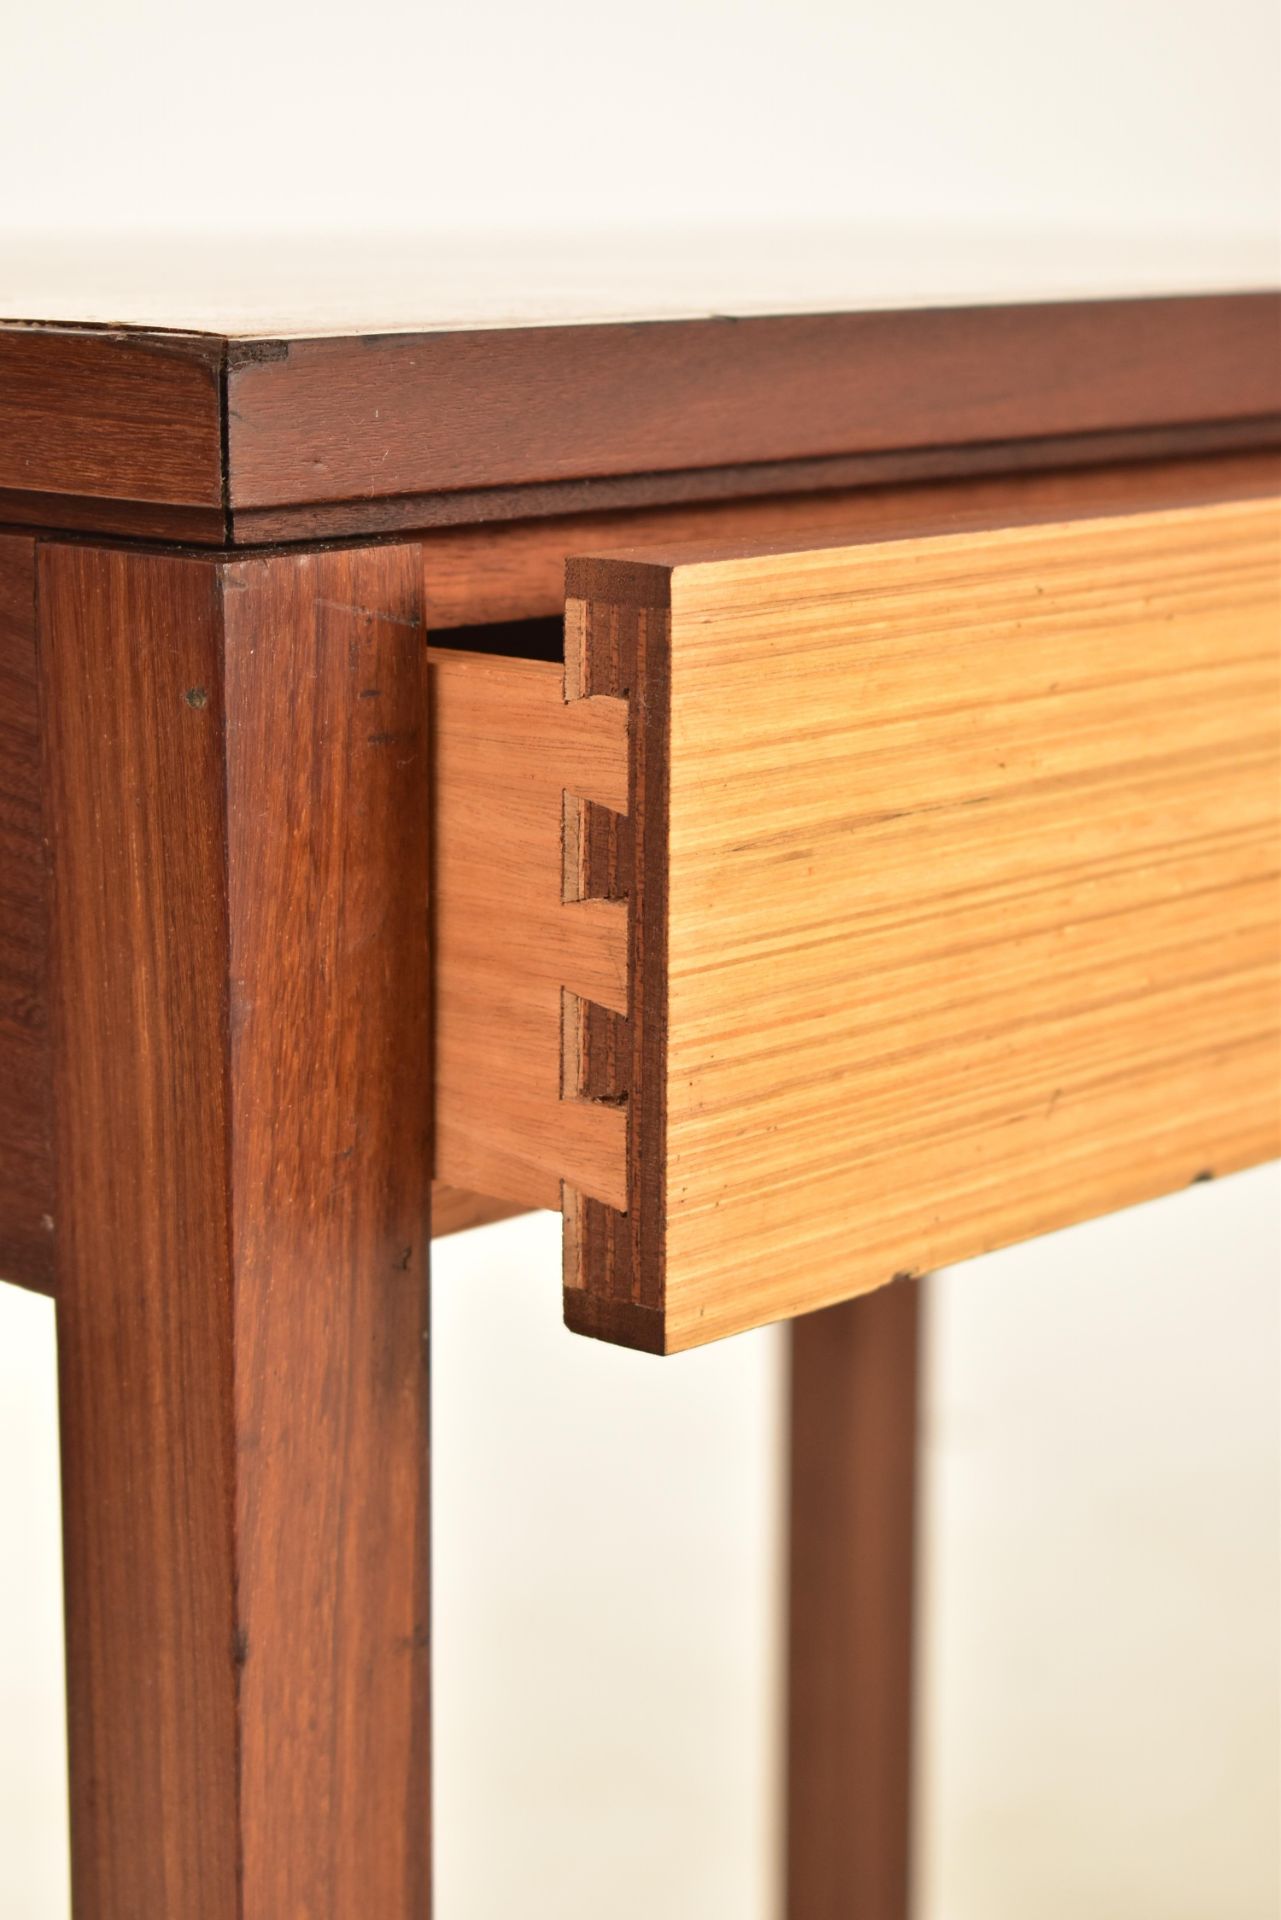 BRITISH MODERN DESIGN - PAIR TEAK OCCASSIONAL SIDE TABLES - Image 3 of 4